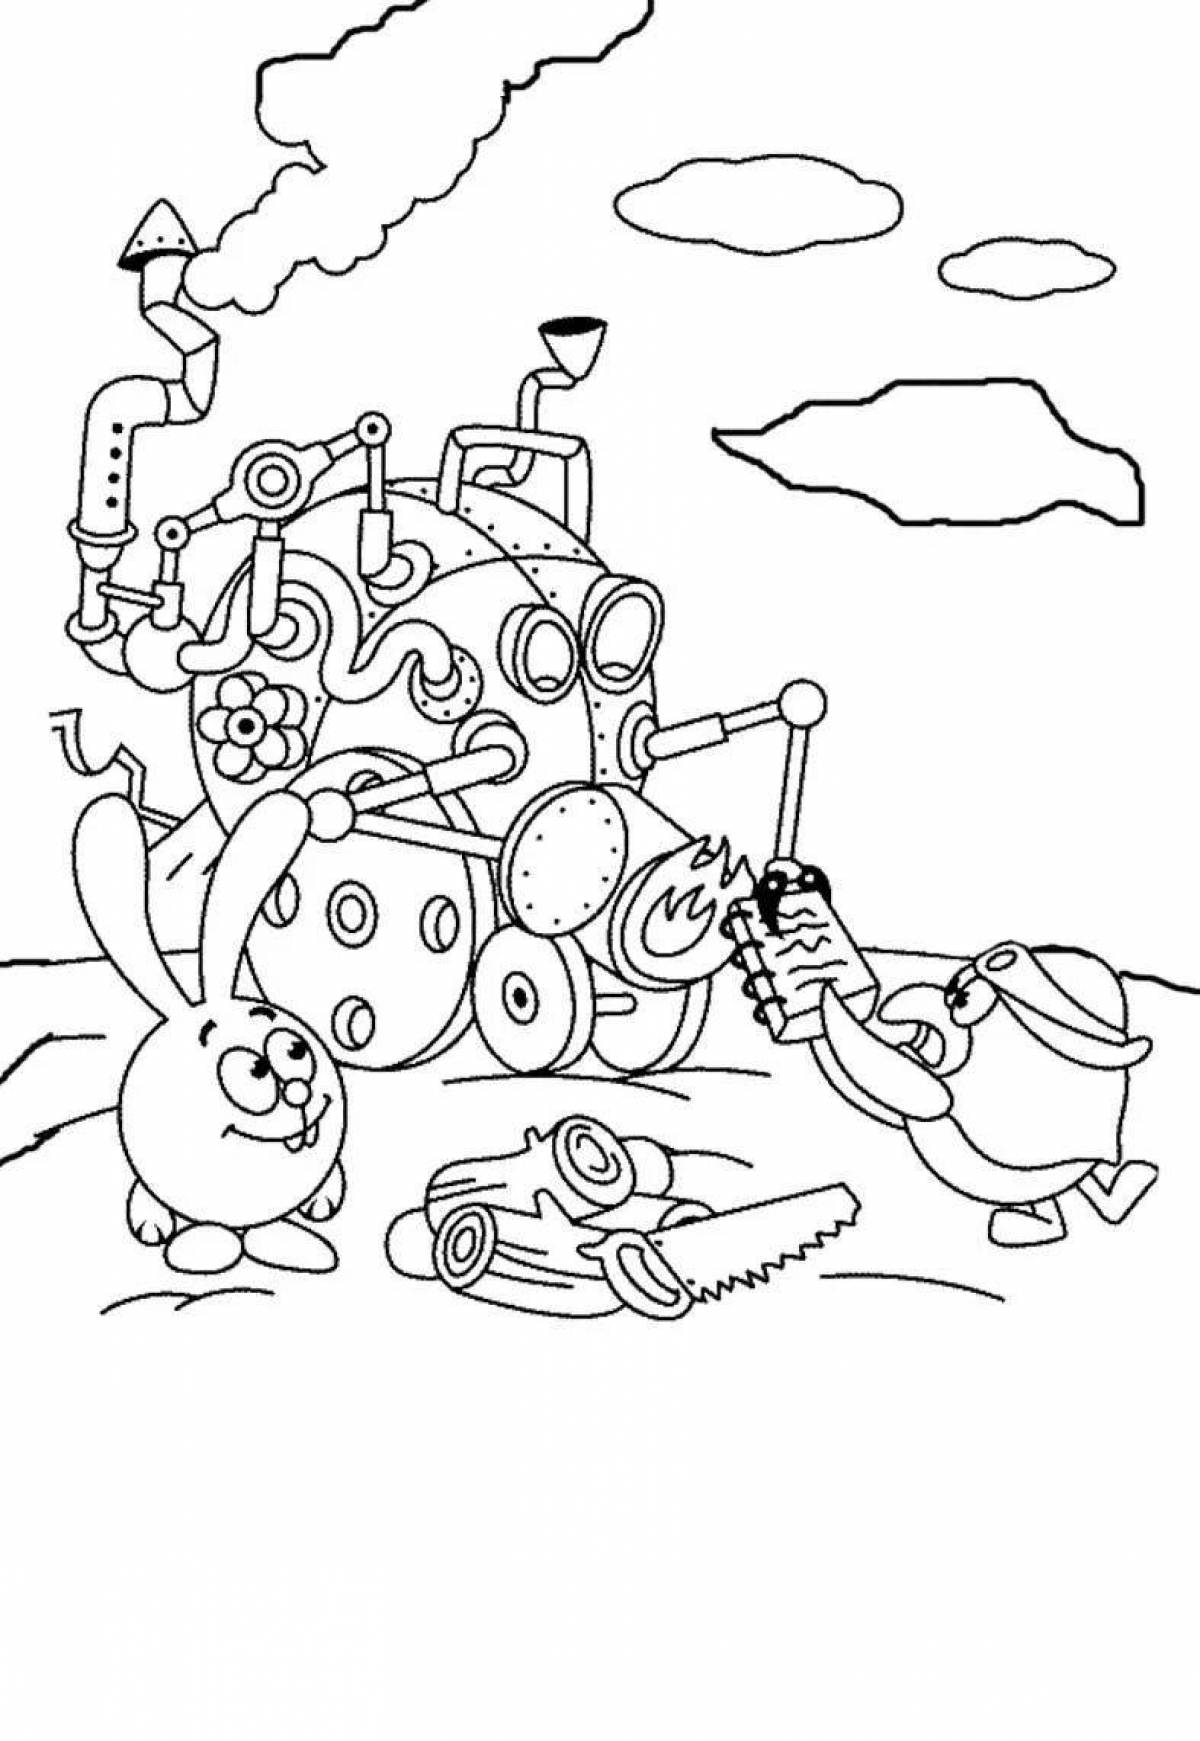 Iron nanny coloring page animated